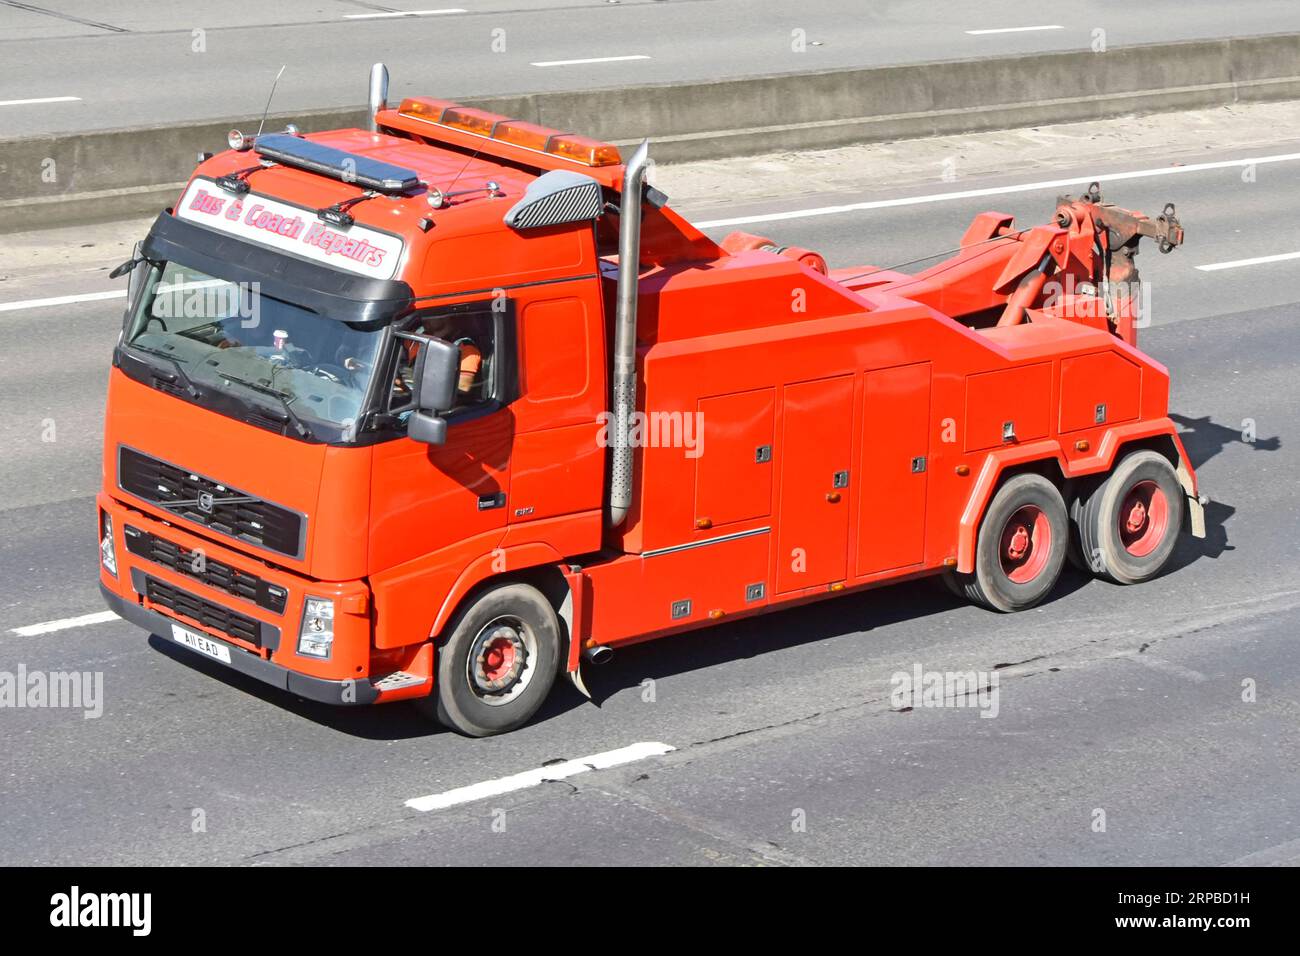 Looking down on clean red unmarked paint on bus & coach Volvo hgv lorry truck a commercial vehicle tow recovery breakdown business on M25 UK motorway Stock Photo